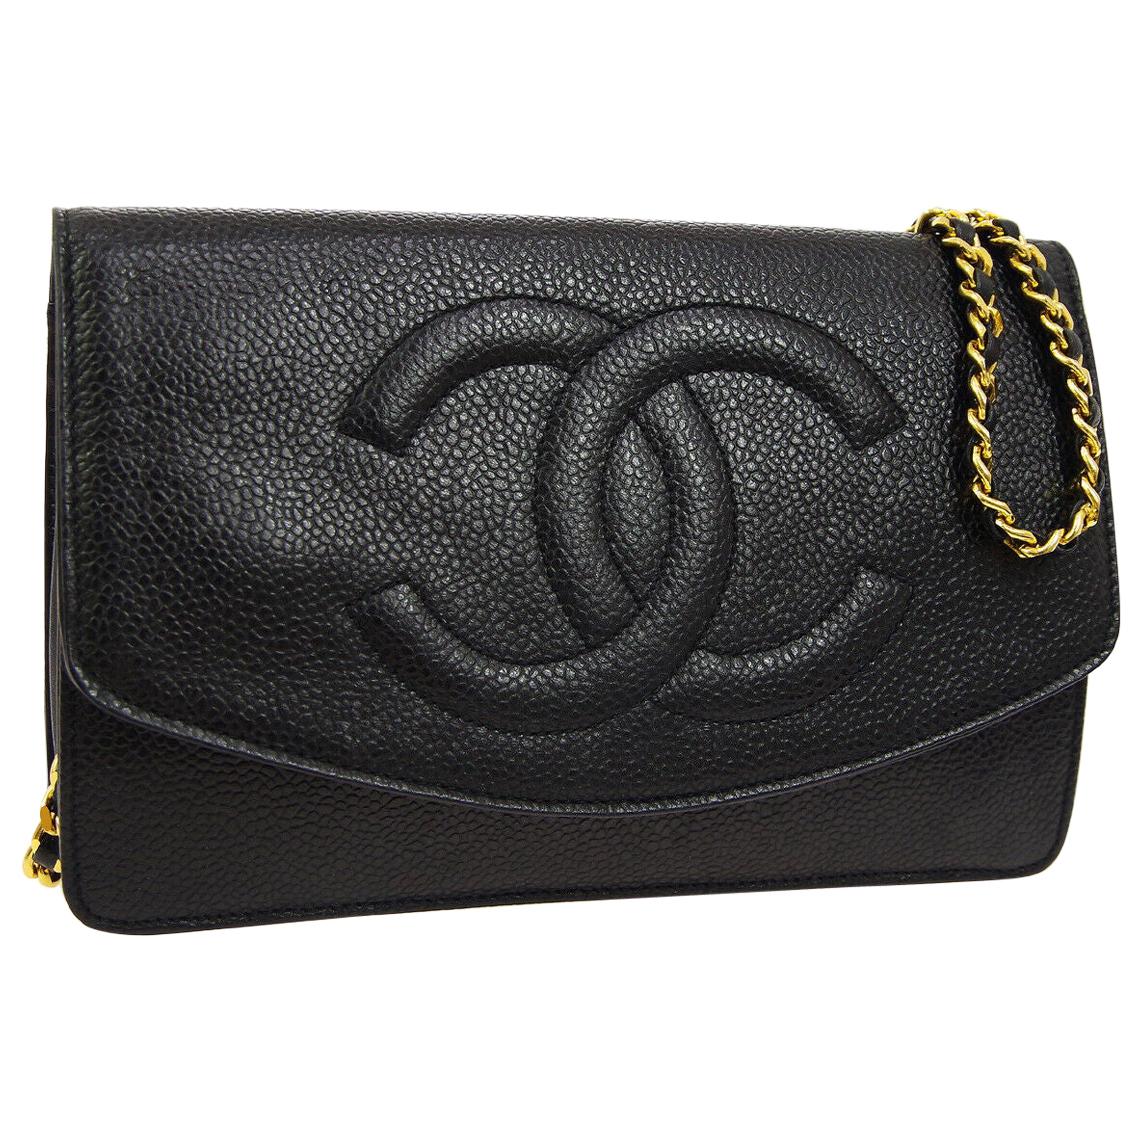 Chanel Black Leather Gold Small Wallet on Chain WOC Shoulder Flap Bag in Box